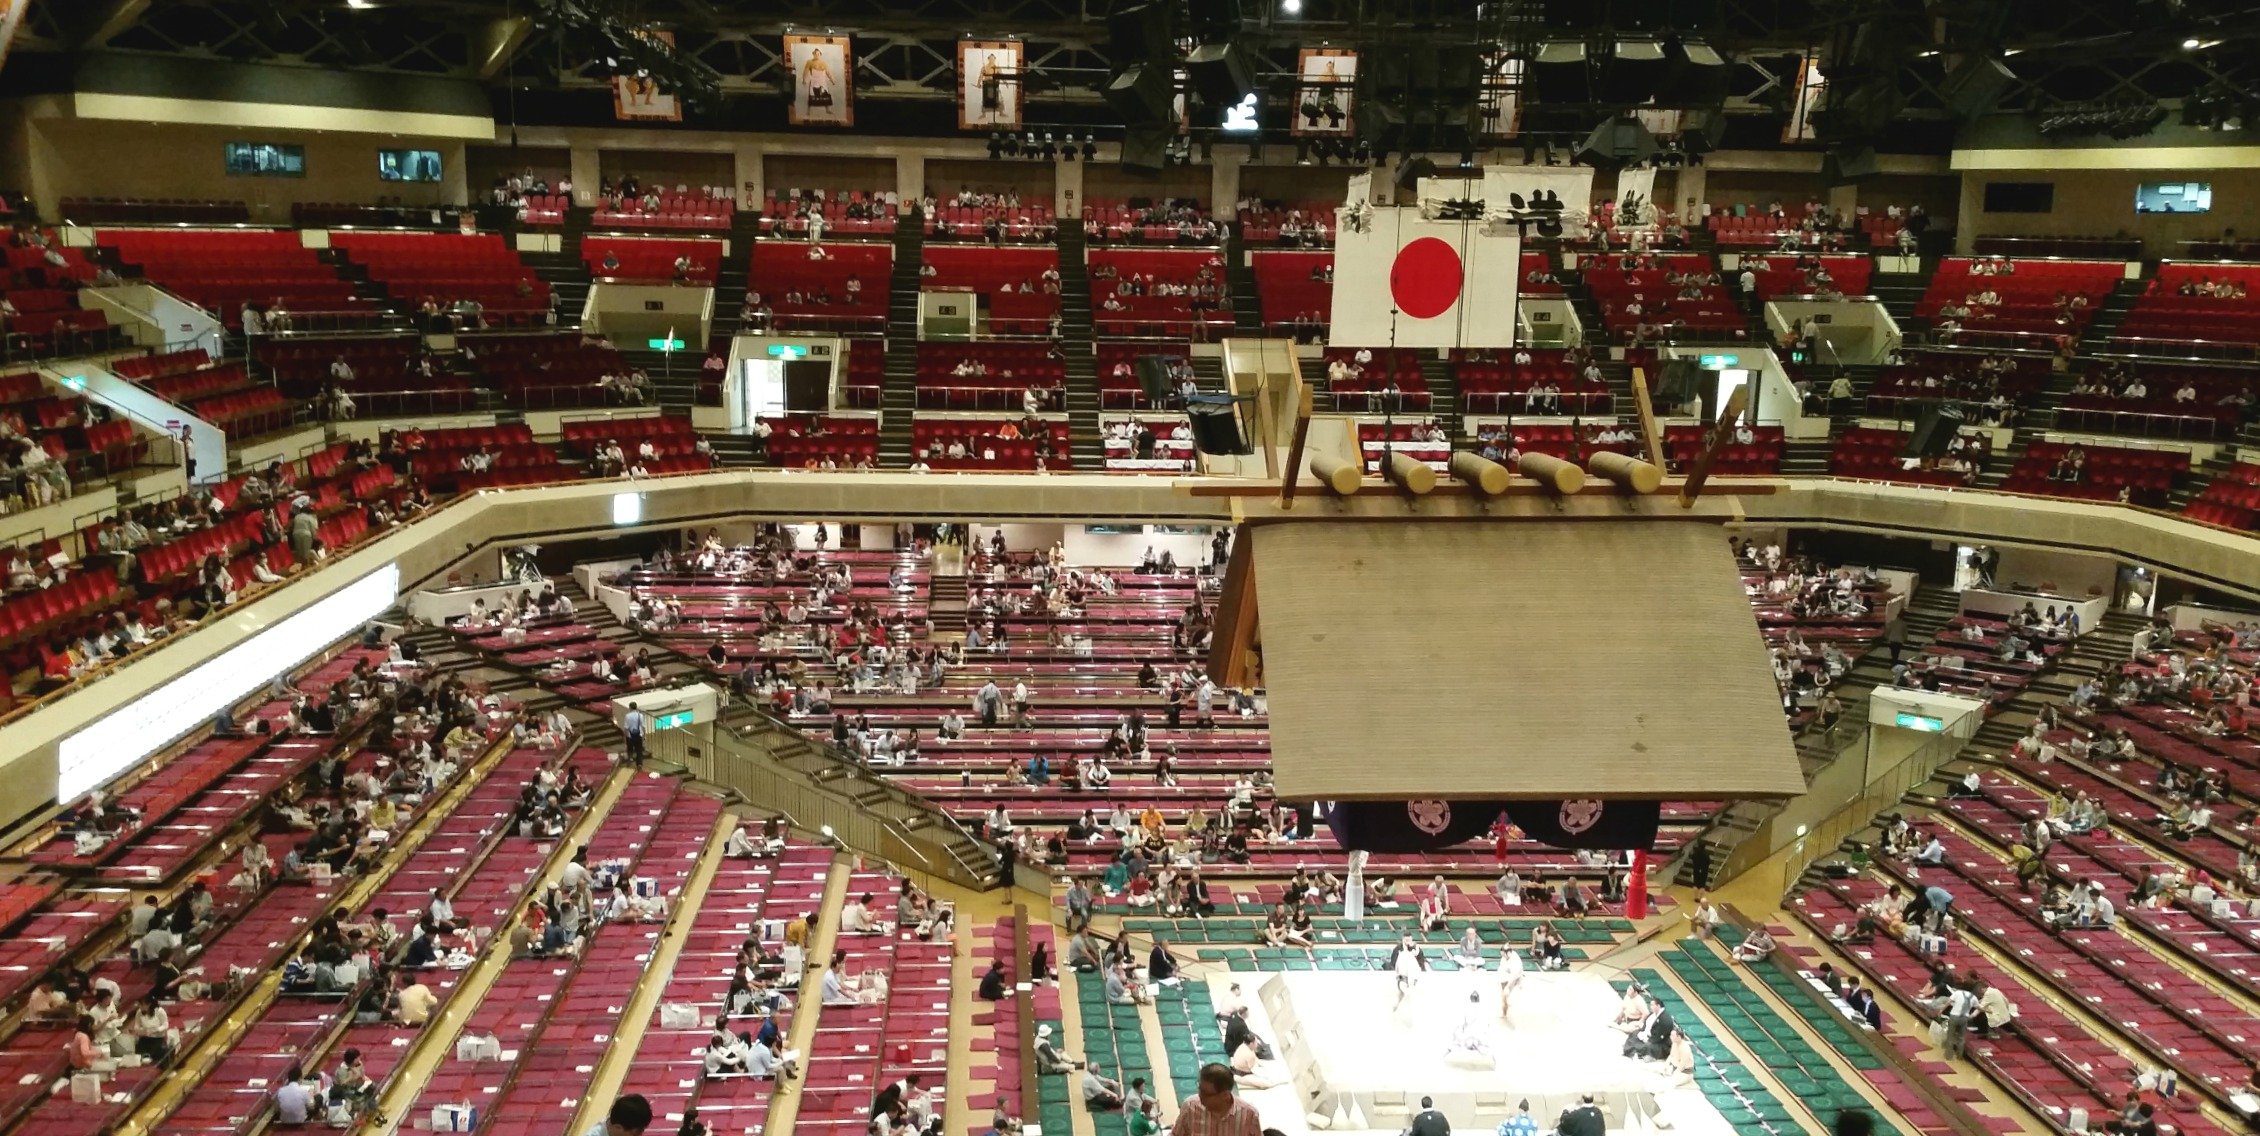 Inside the Ryogoku Kokugikan Sumo Wrestling Arena in Tokyo When We First Arrived - Mostly Empty!